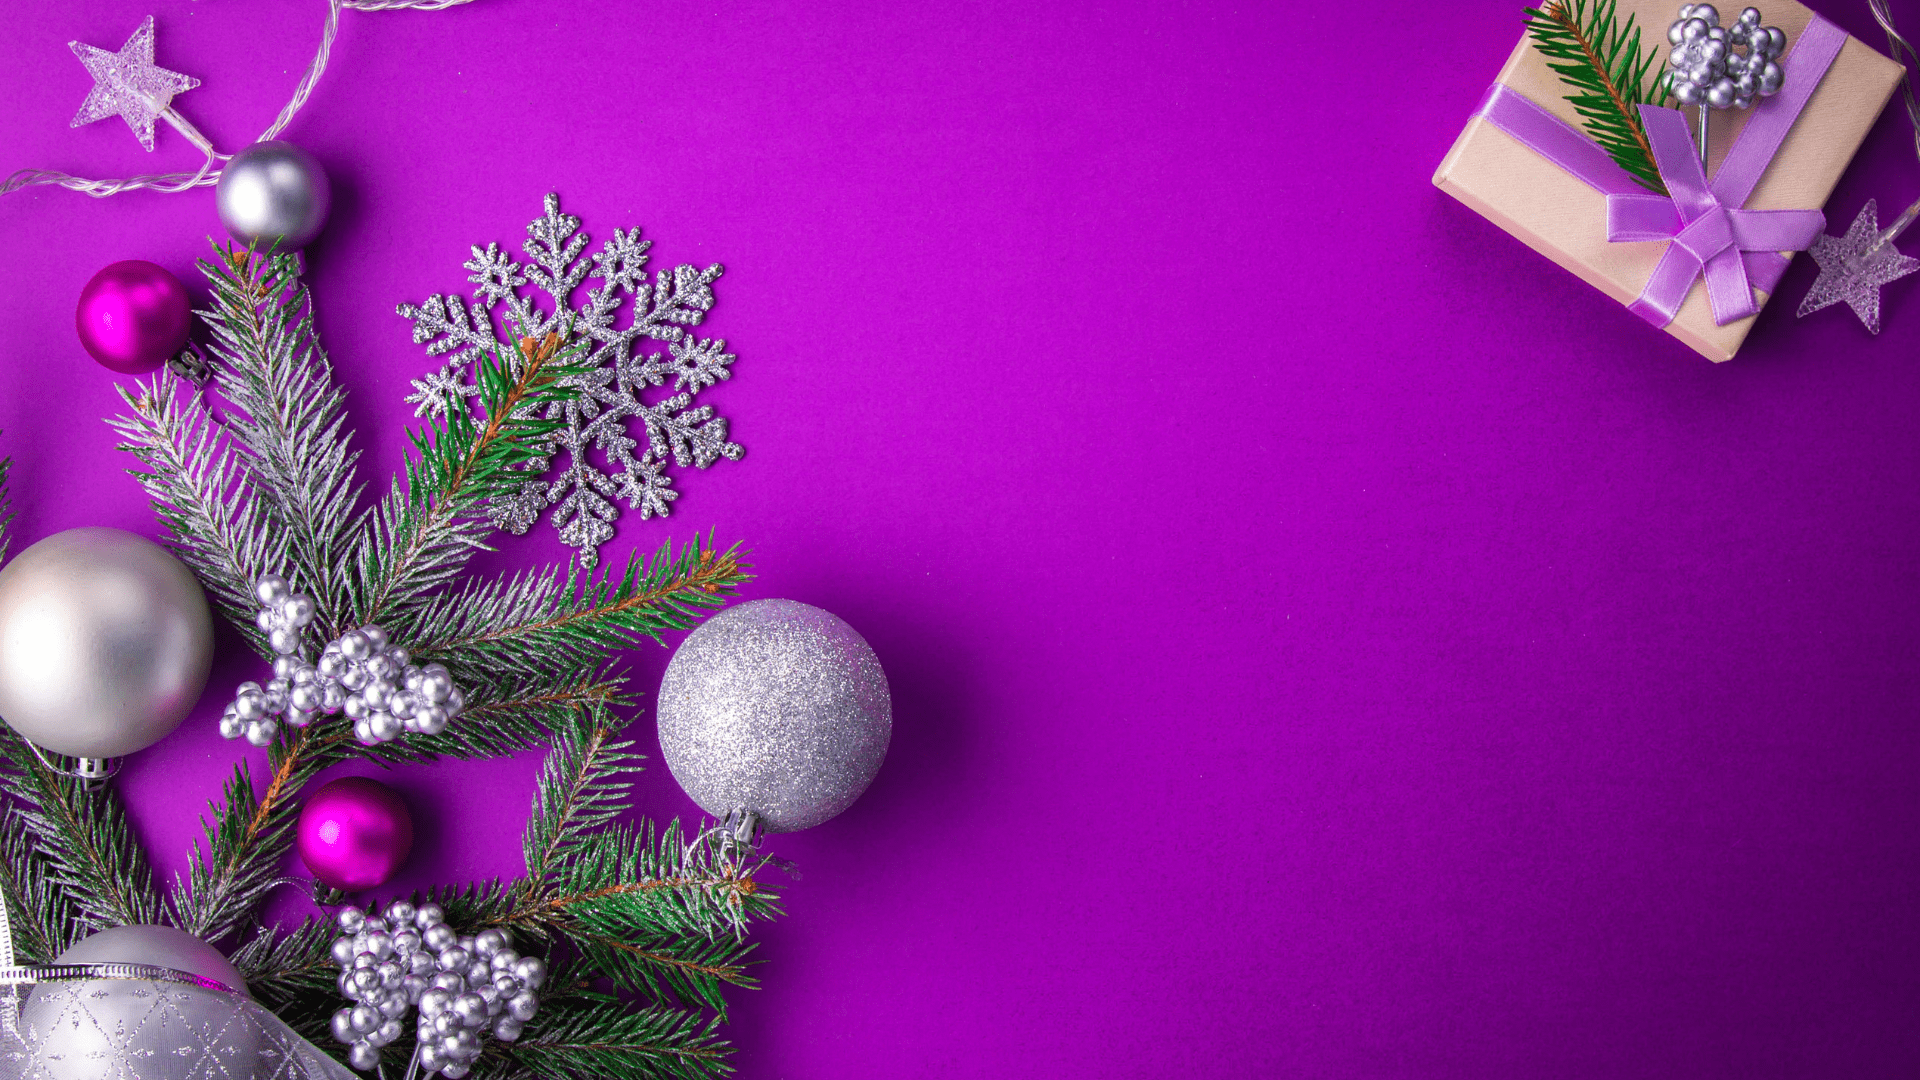 Christmas decor and gifts for nurses on a bright purple background